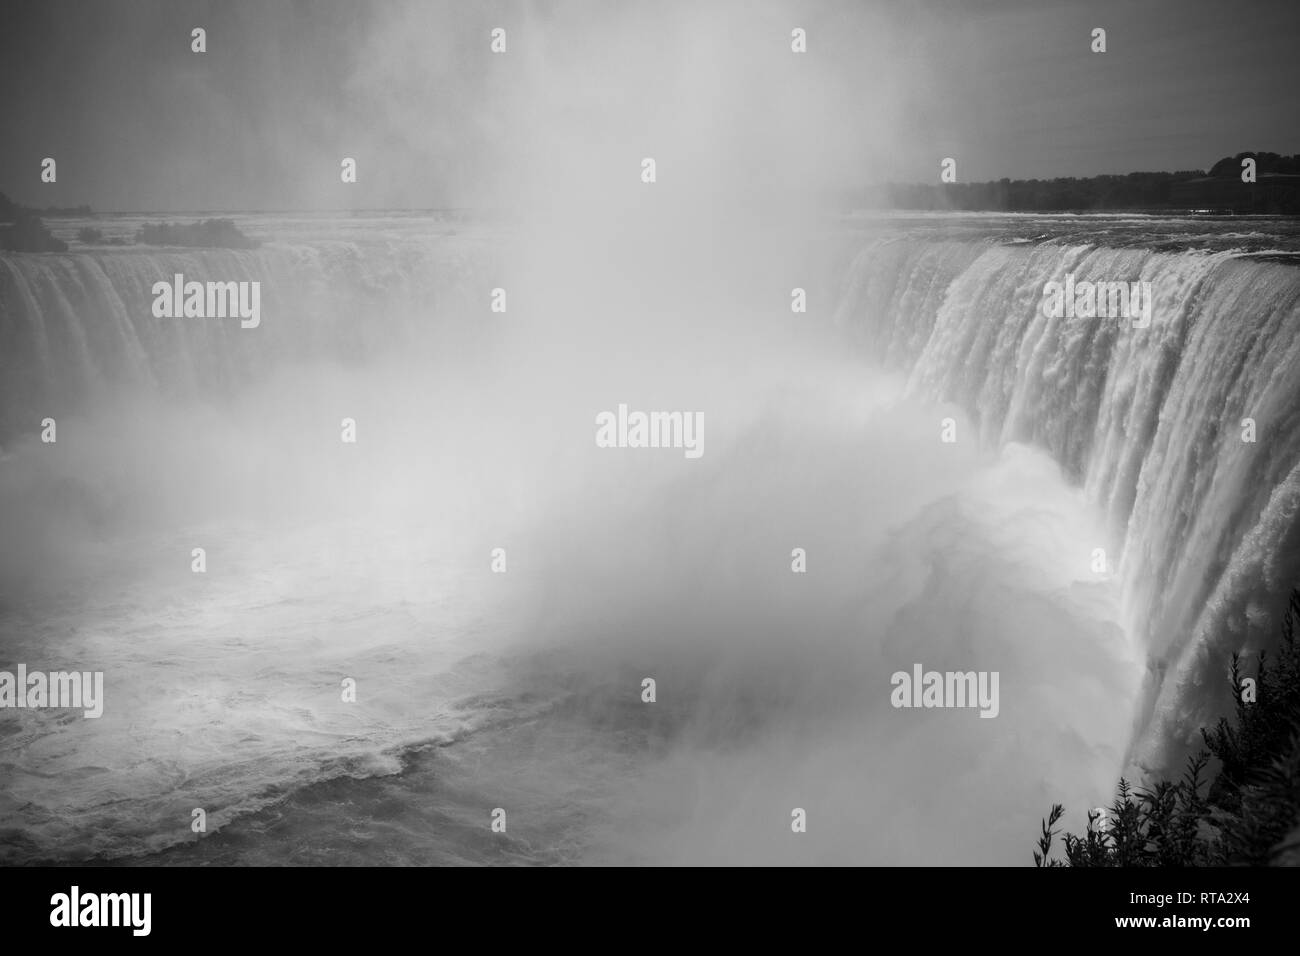 Niagara Falls fury, aged photo style. The spectacular Horseshoe Fall that lies on the border of the United States and Canada. Stock Photo